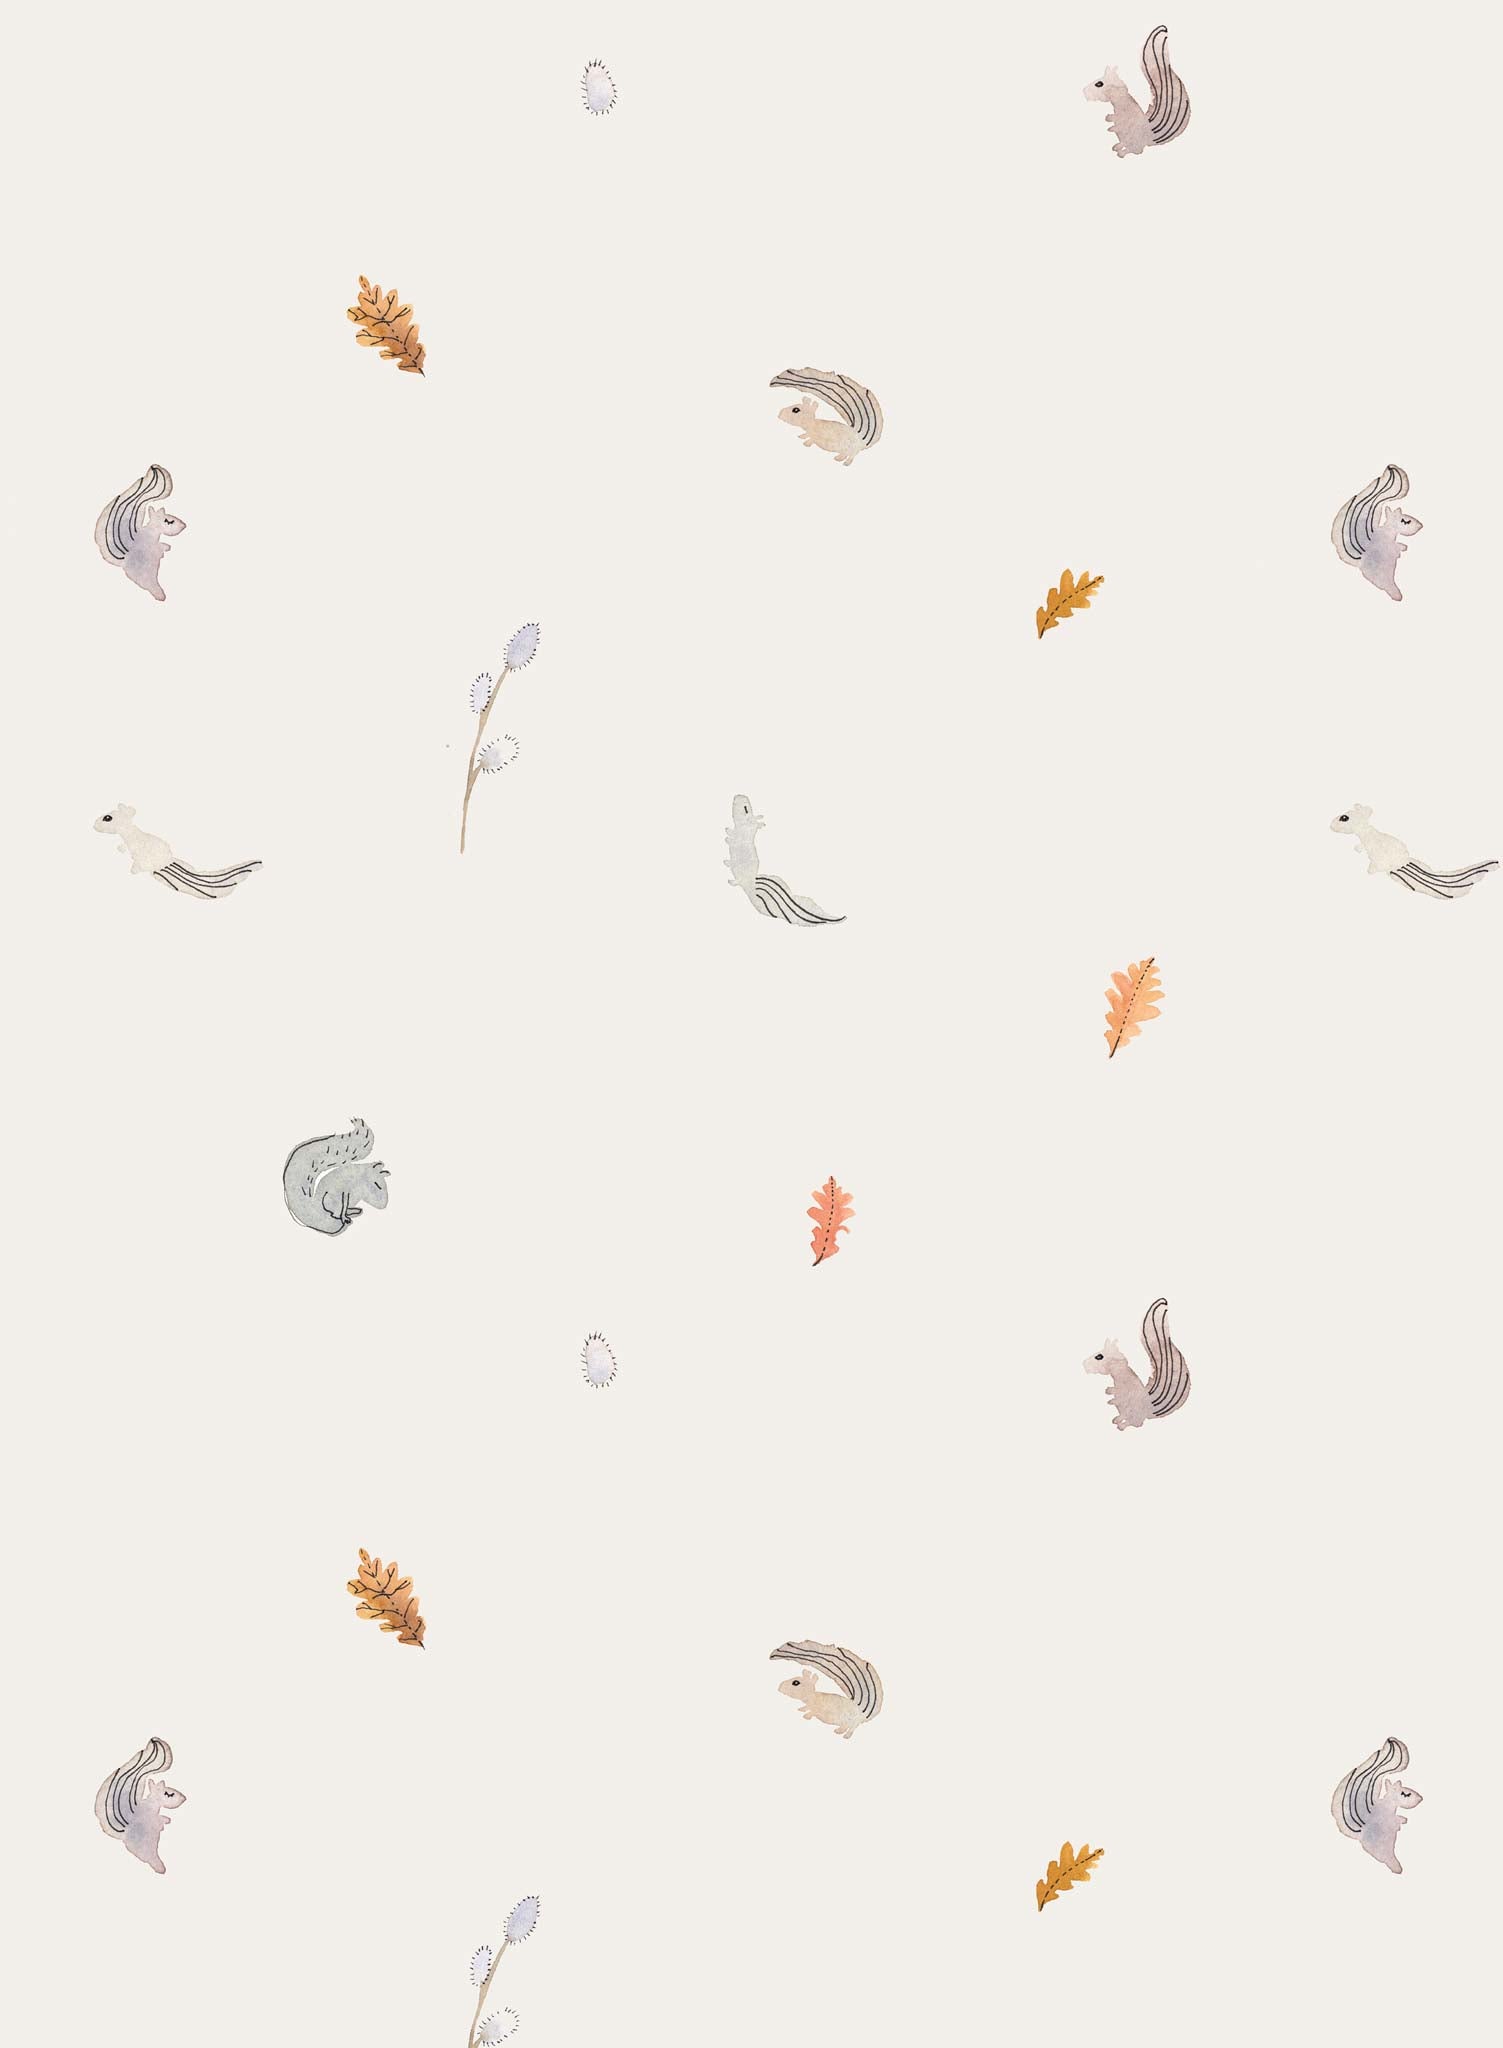 Squirrel Friends is a Minimalist wallpaper by Opposite Wall of colorful squirrels.